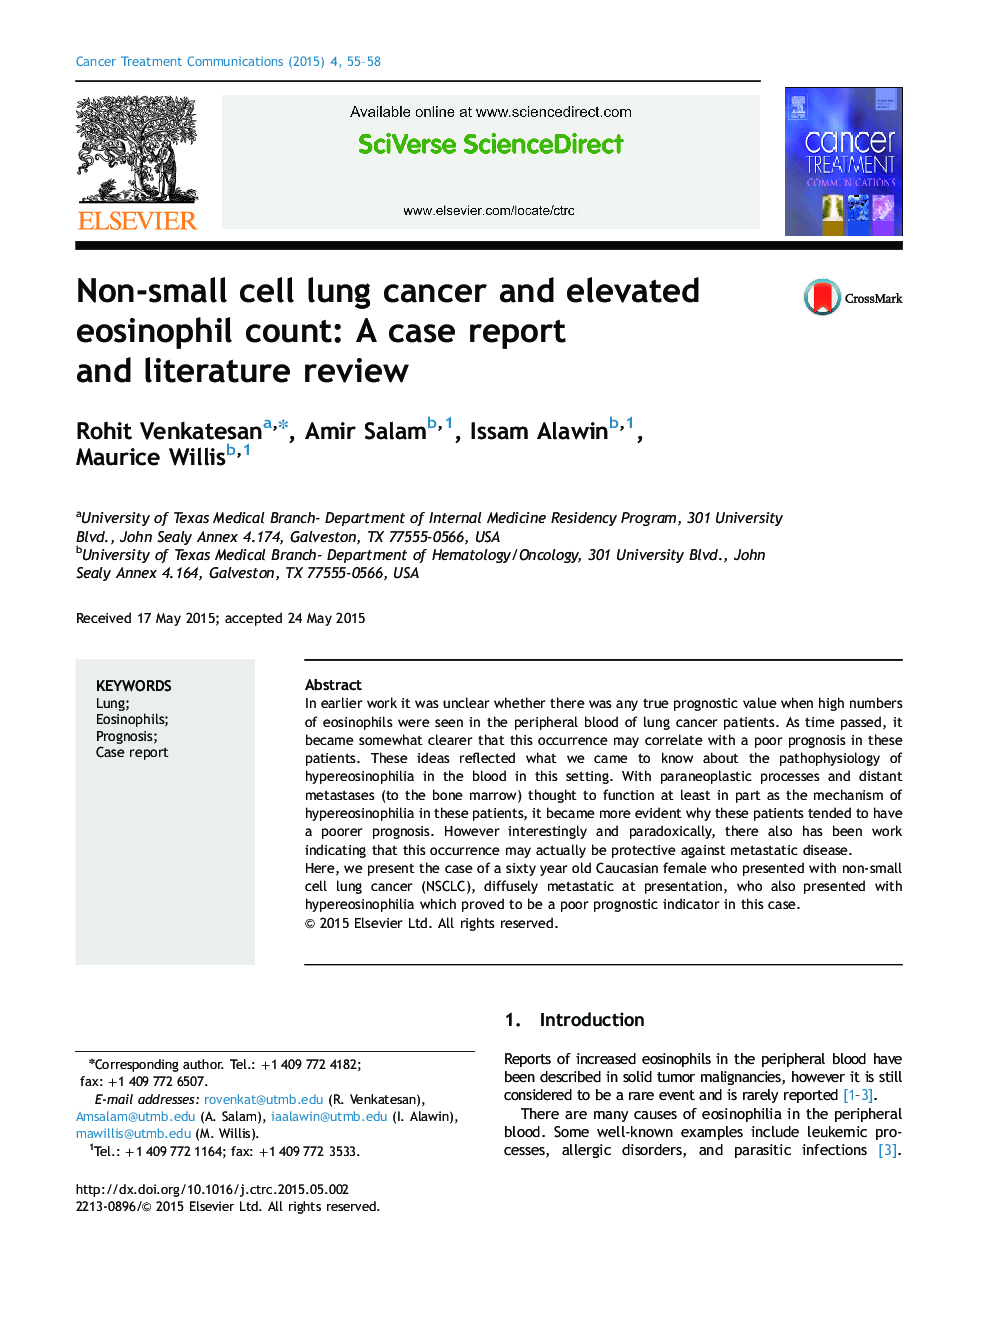 Non-small cell lung cancer and elevated eosinophil count: A case report and literature review